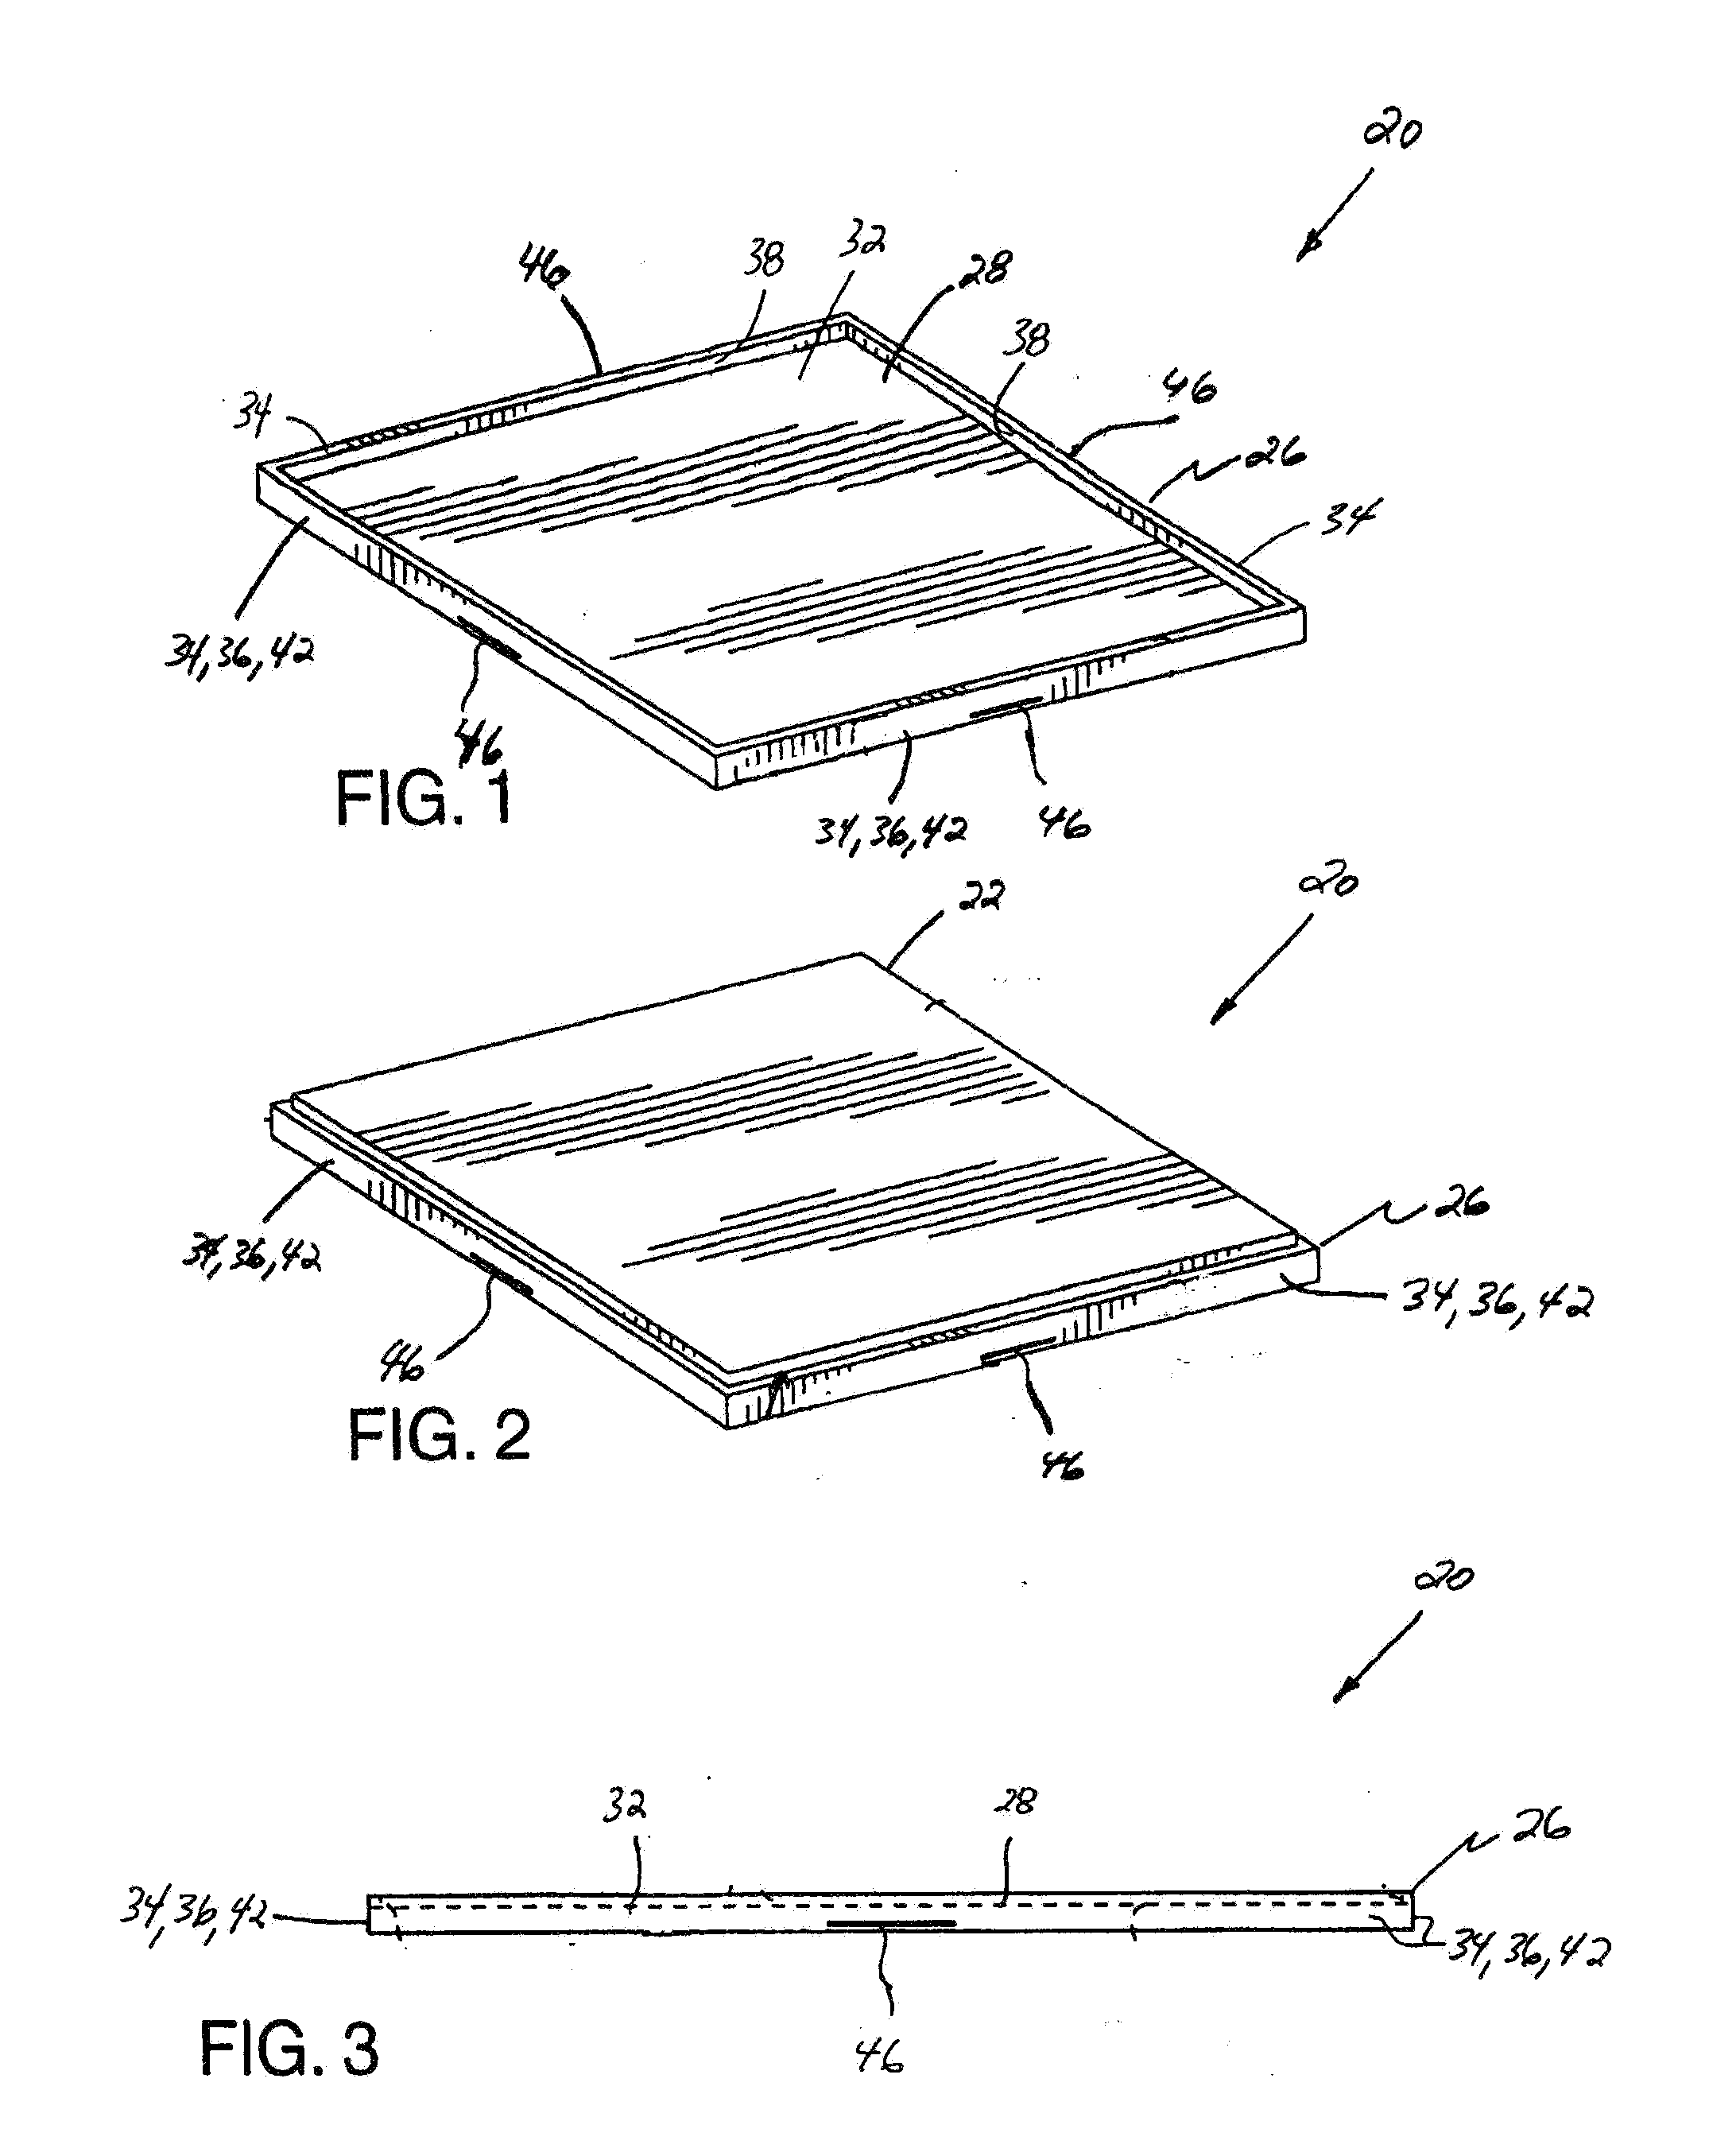 System and apparatus for installation of tile floor